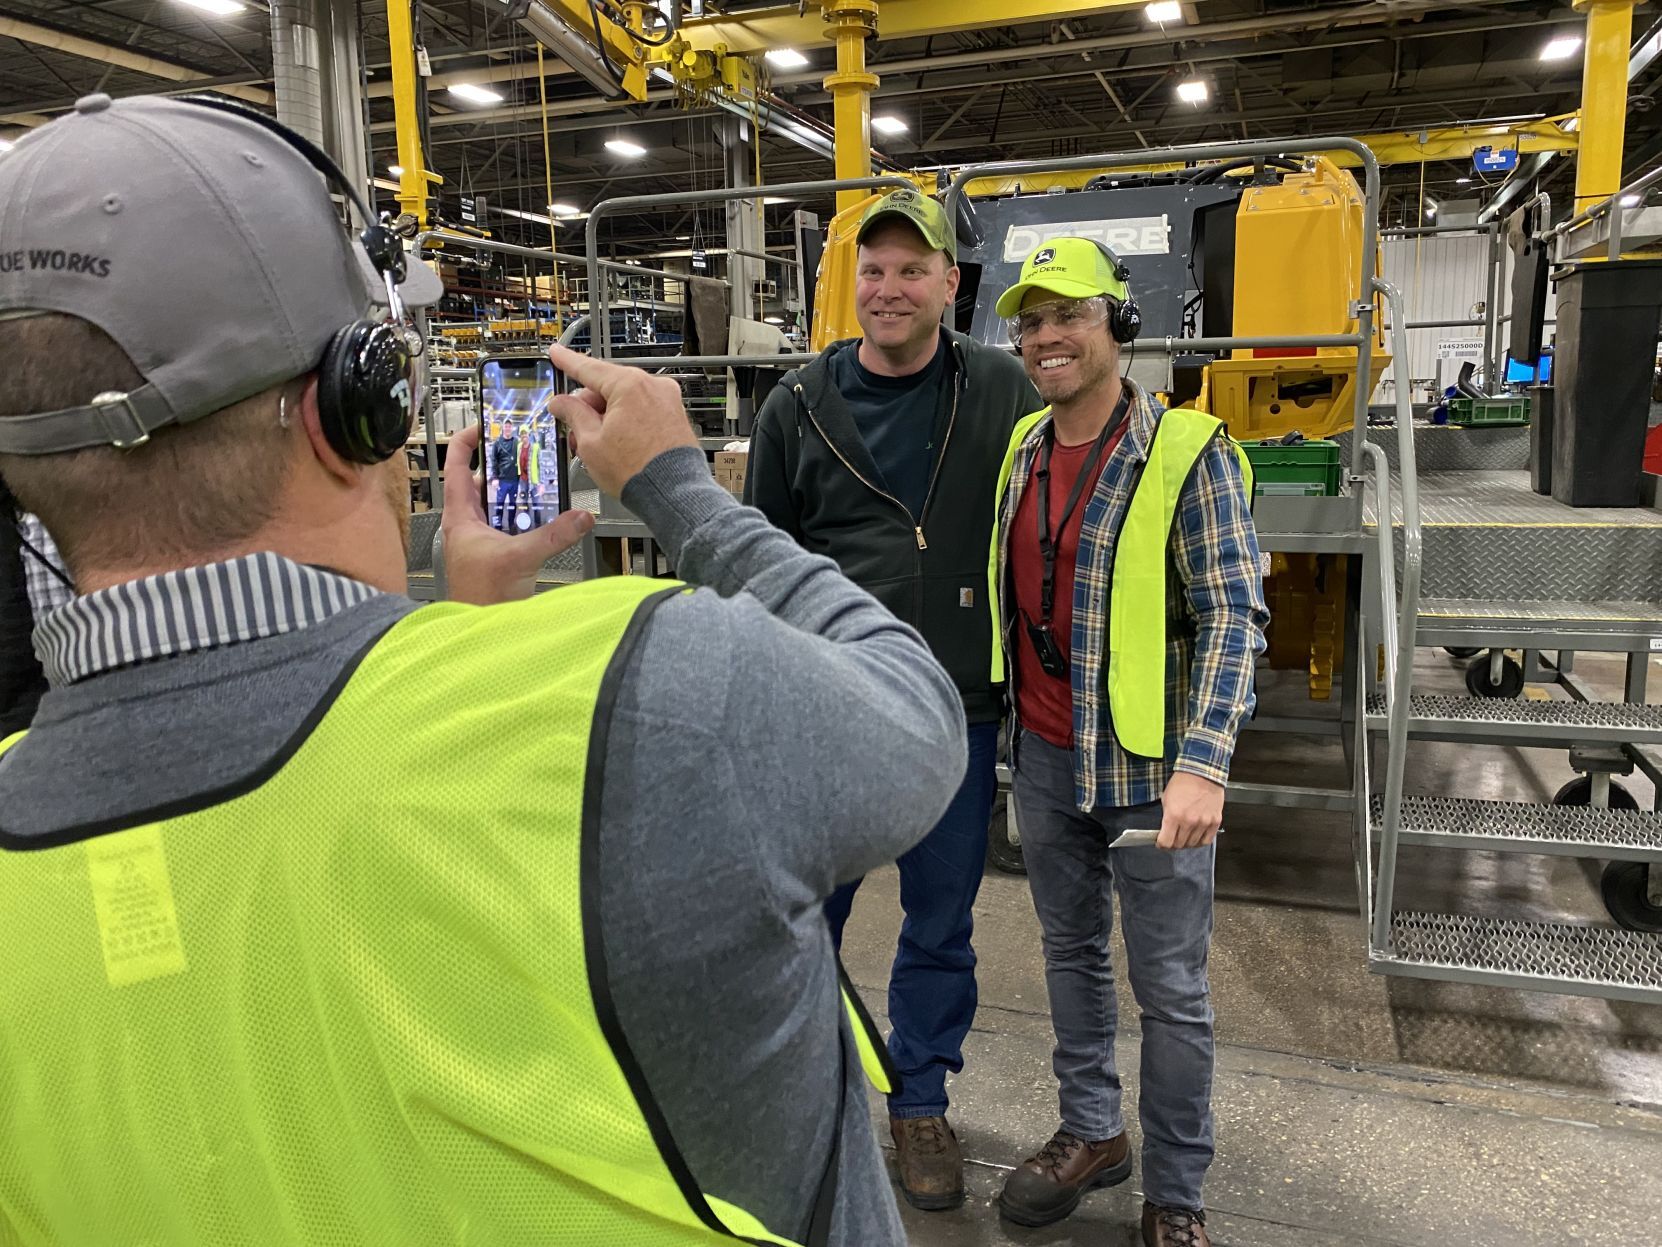 Country music star Dustin Lynch (right) poses for a photo at John Deere Dubuque Works on Thursday.     PHOTO CREDIT: Contributed